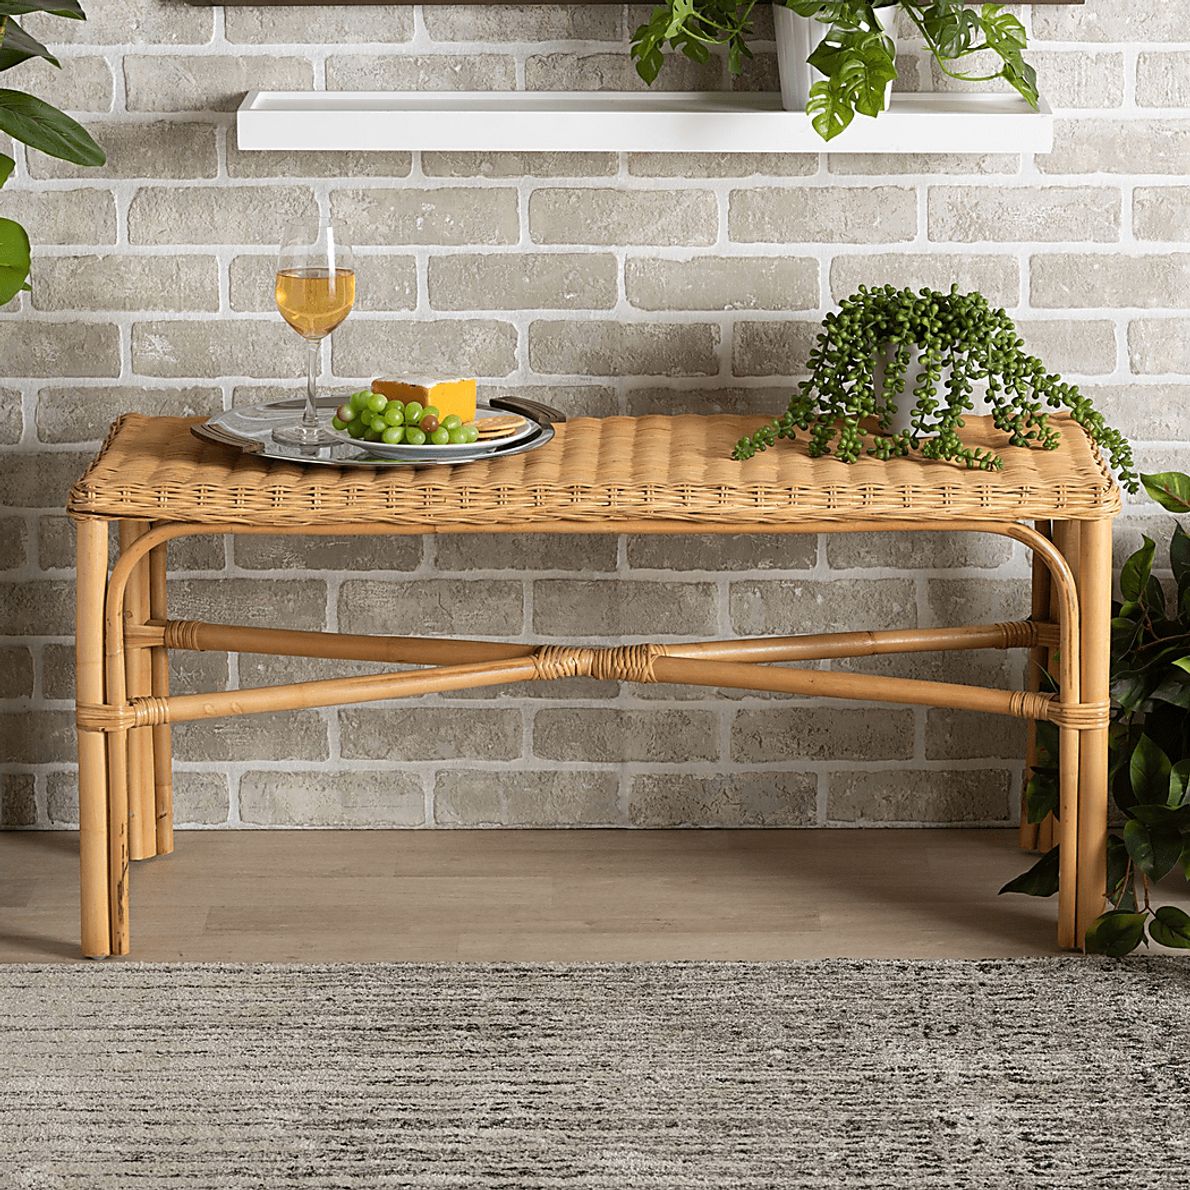 Carapia Brown Bench